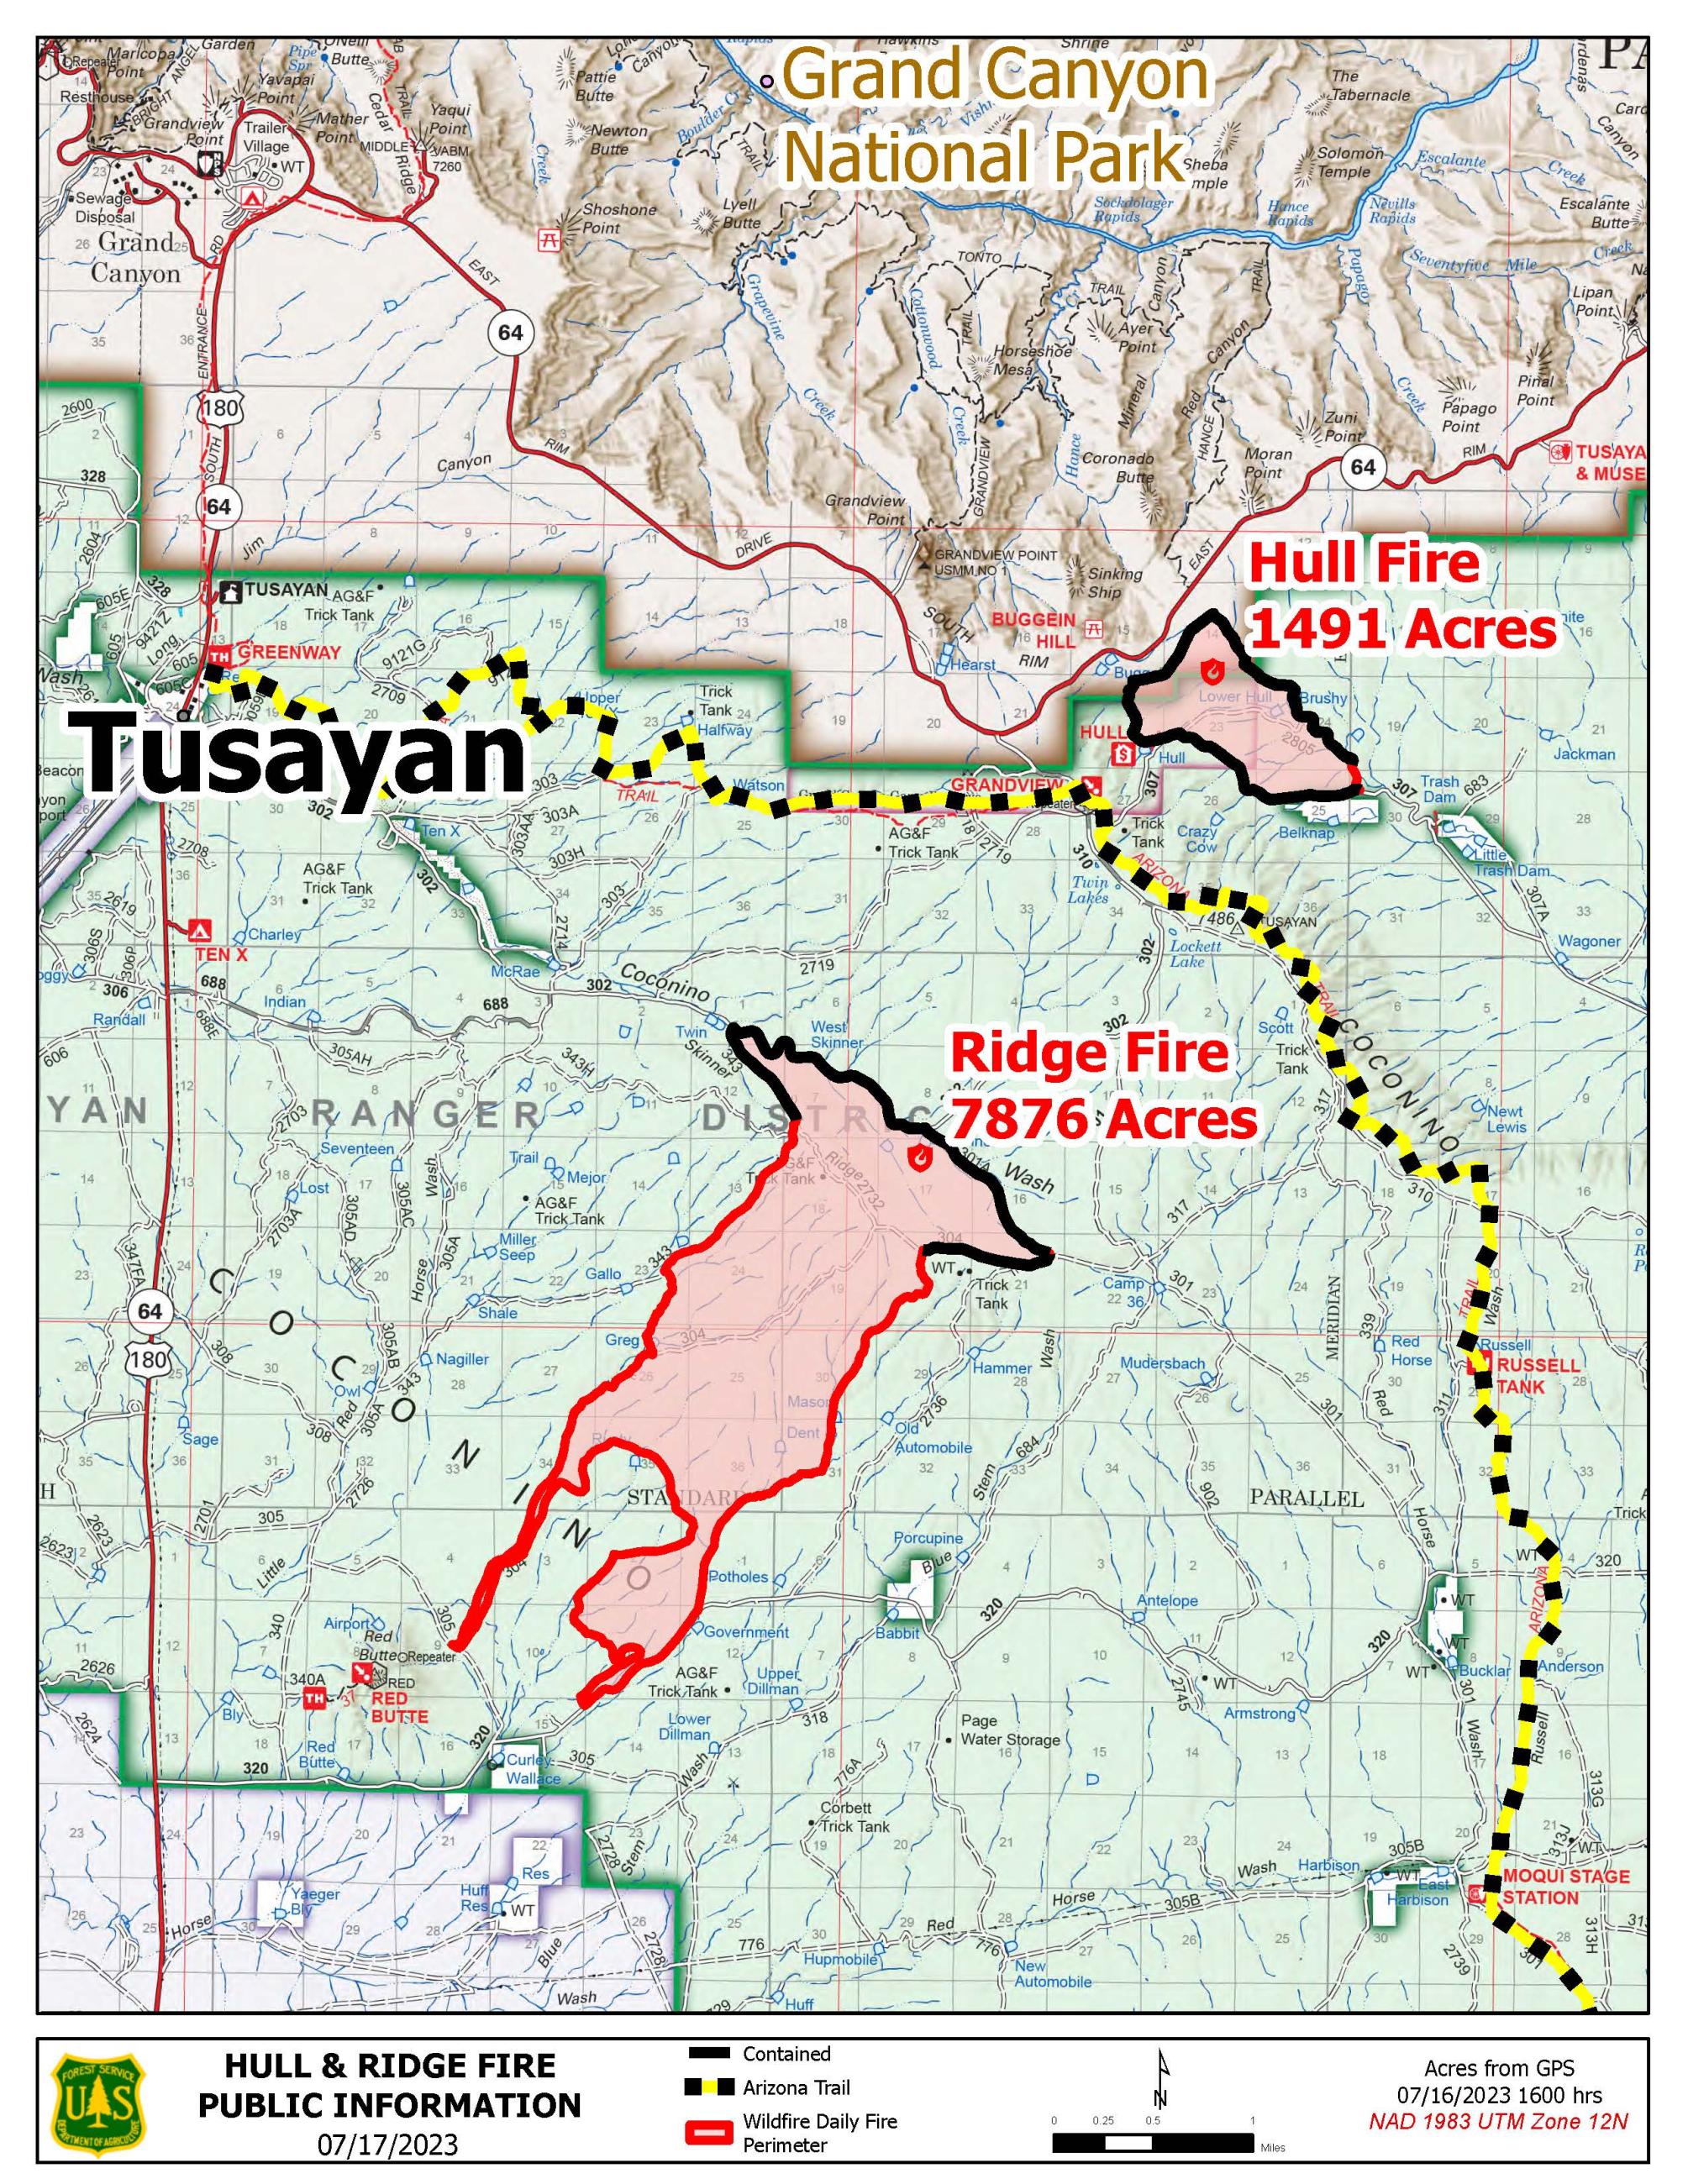 Map of the Ridge Fire area on 7/16.